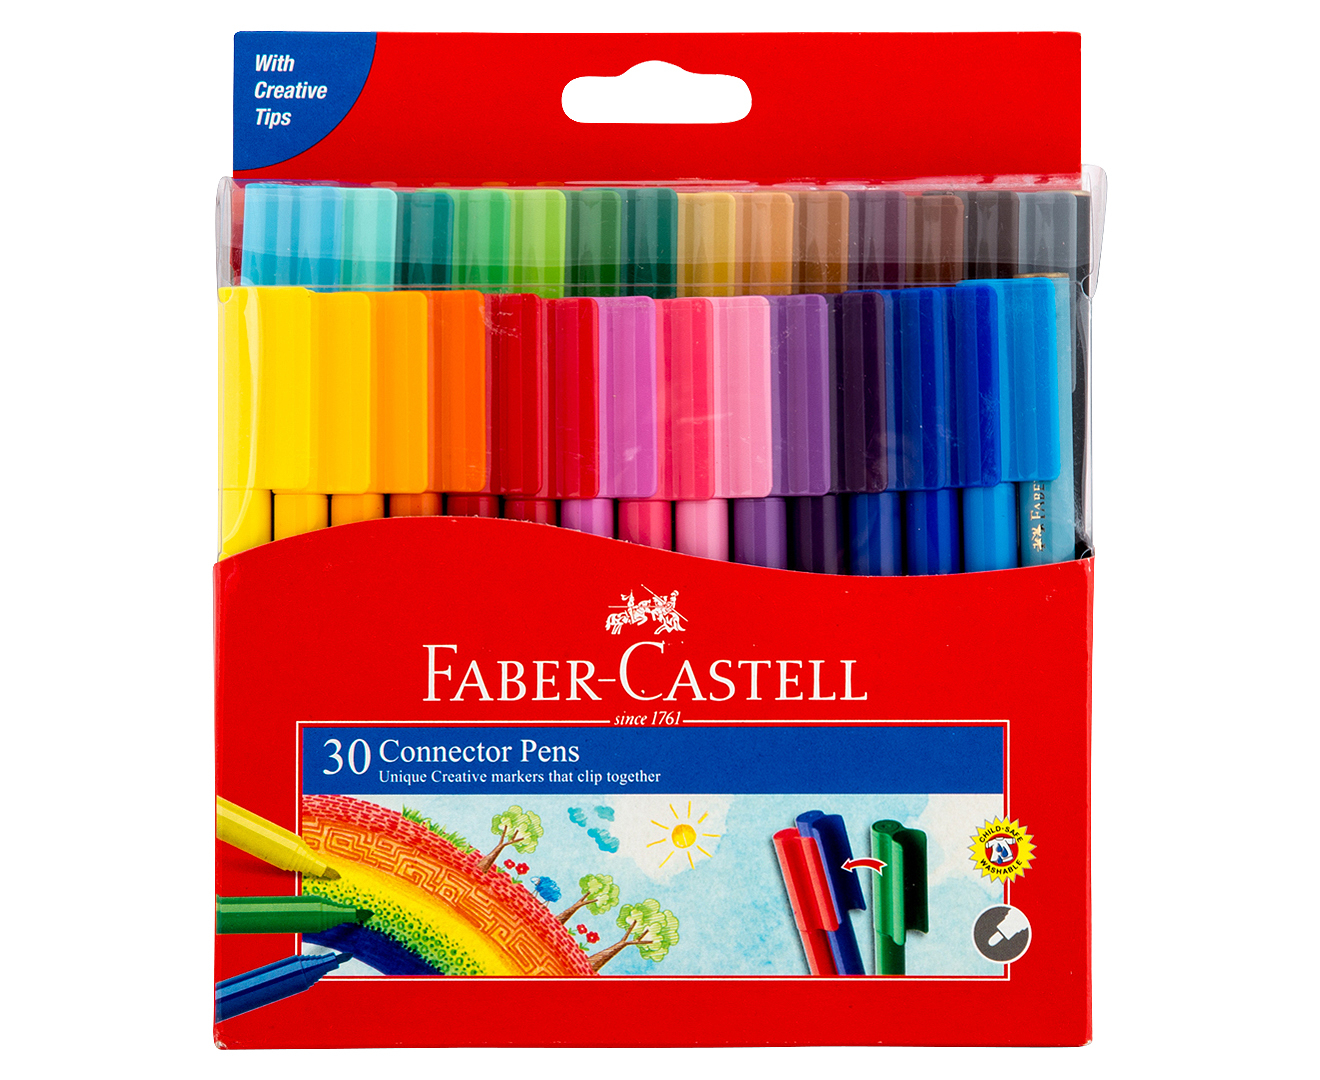  Faber  Castell  Connector  Pens  30 Pack Assorted Scoopon 